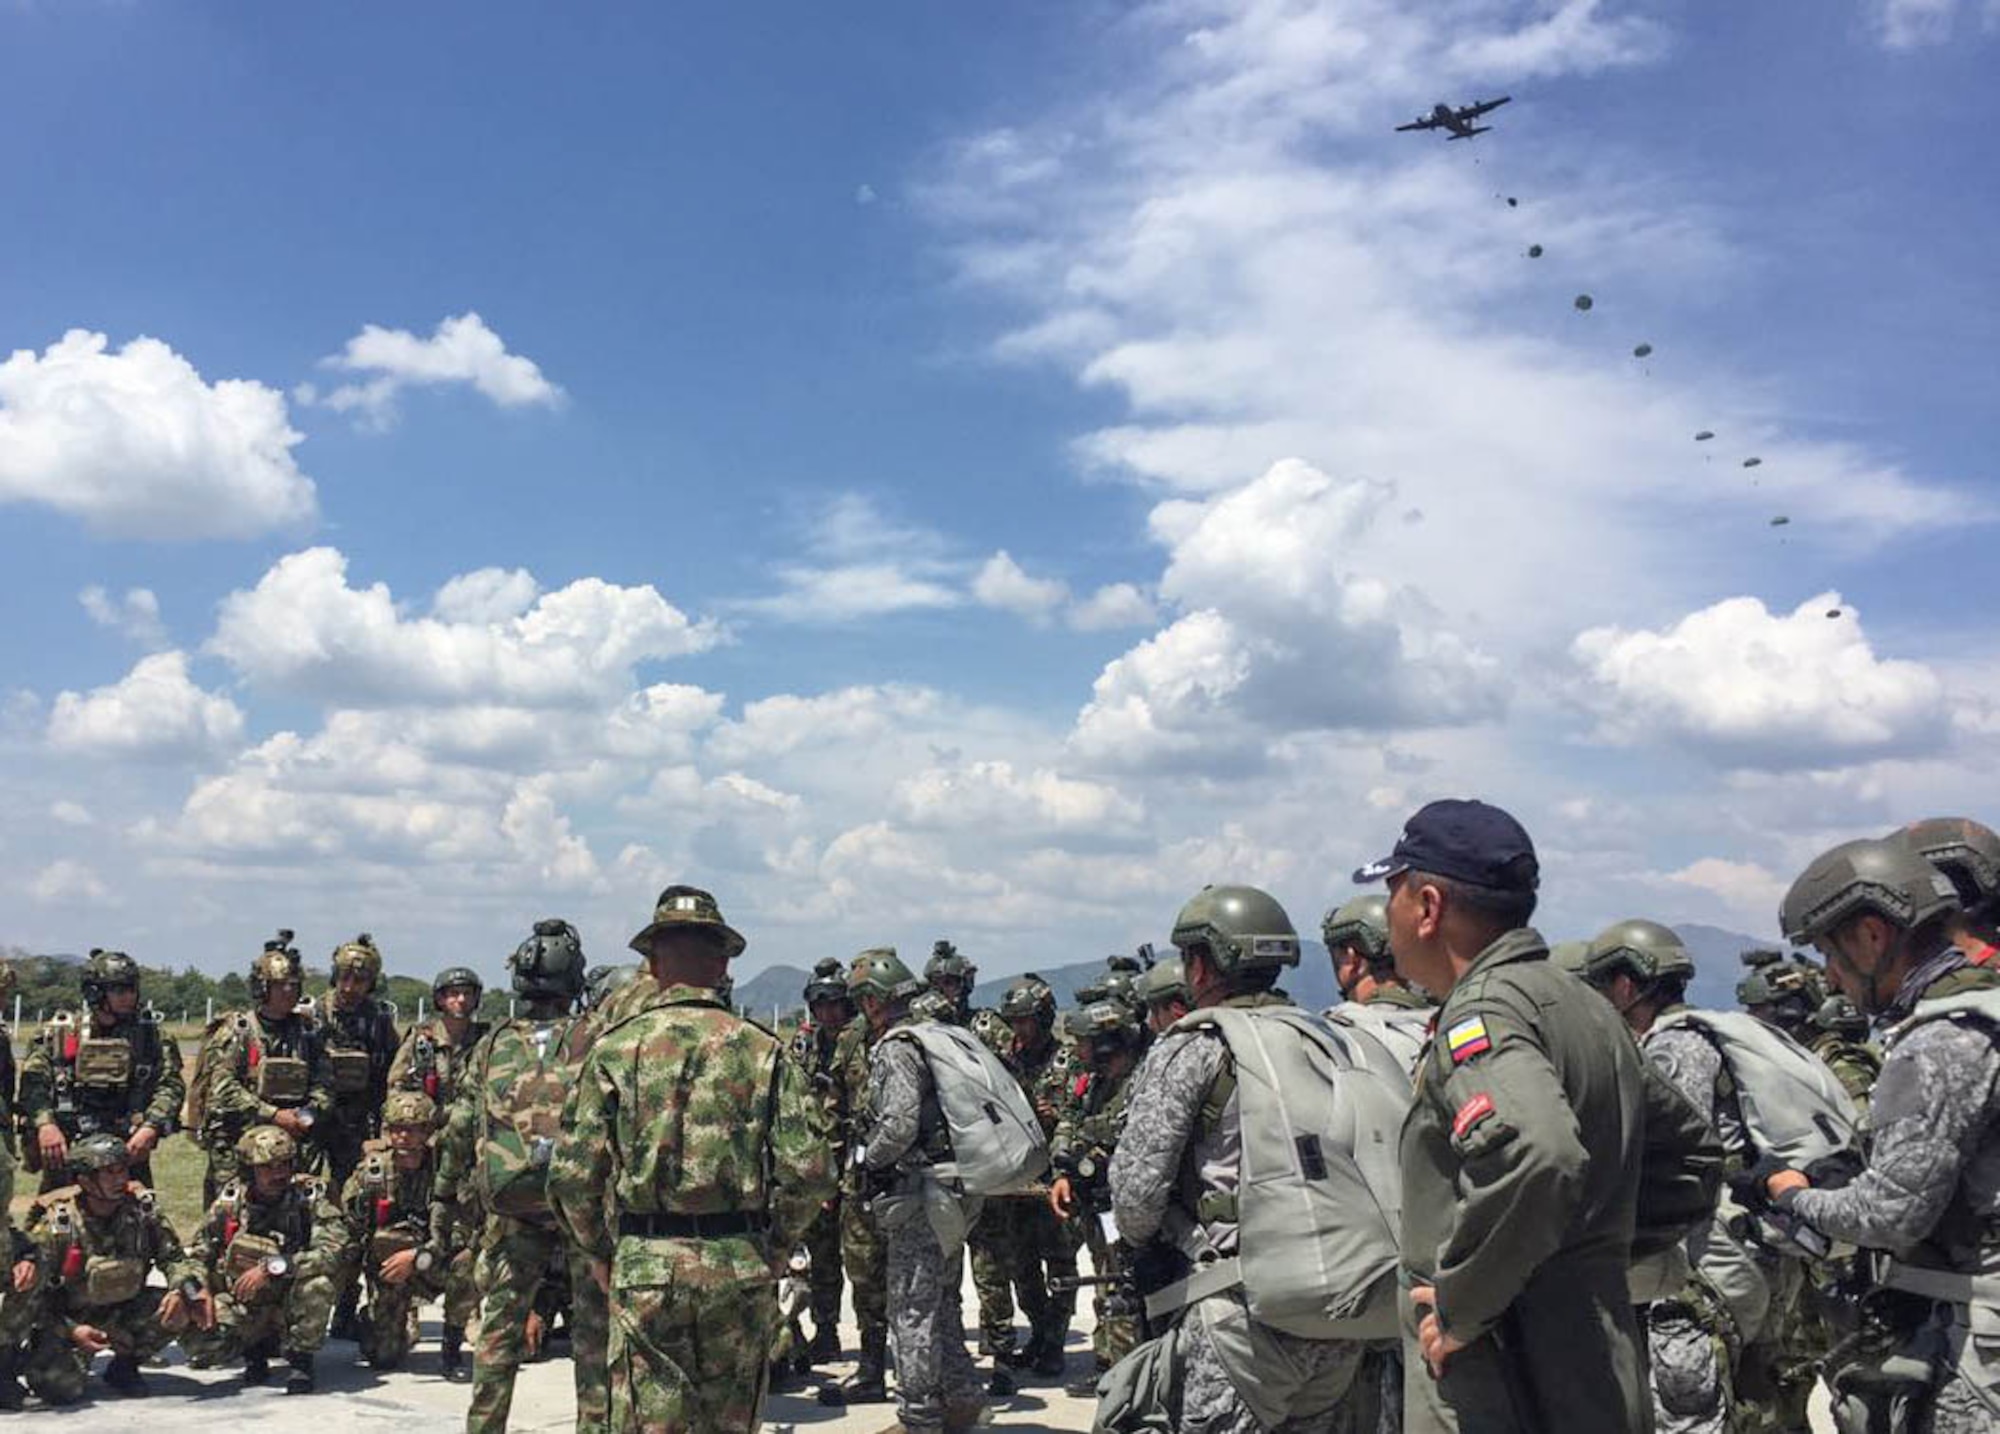 A Wyoming Air National Guard C-130 Hercules, air drops special forces from the U.S. Army, Colombian Army, Navy and Air Force during a training scenario in Bogota, Colombia. The 571st Mobility Support Advisory Squadron, alongside Airmen from five other squadrons spent three weeks training the Colombian forces in air operations, aeromedical evacuation, propeller balance, zodiac rigging and medical intelligence courses. (Courtesy Photo)